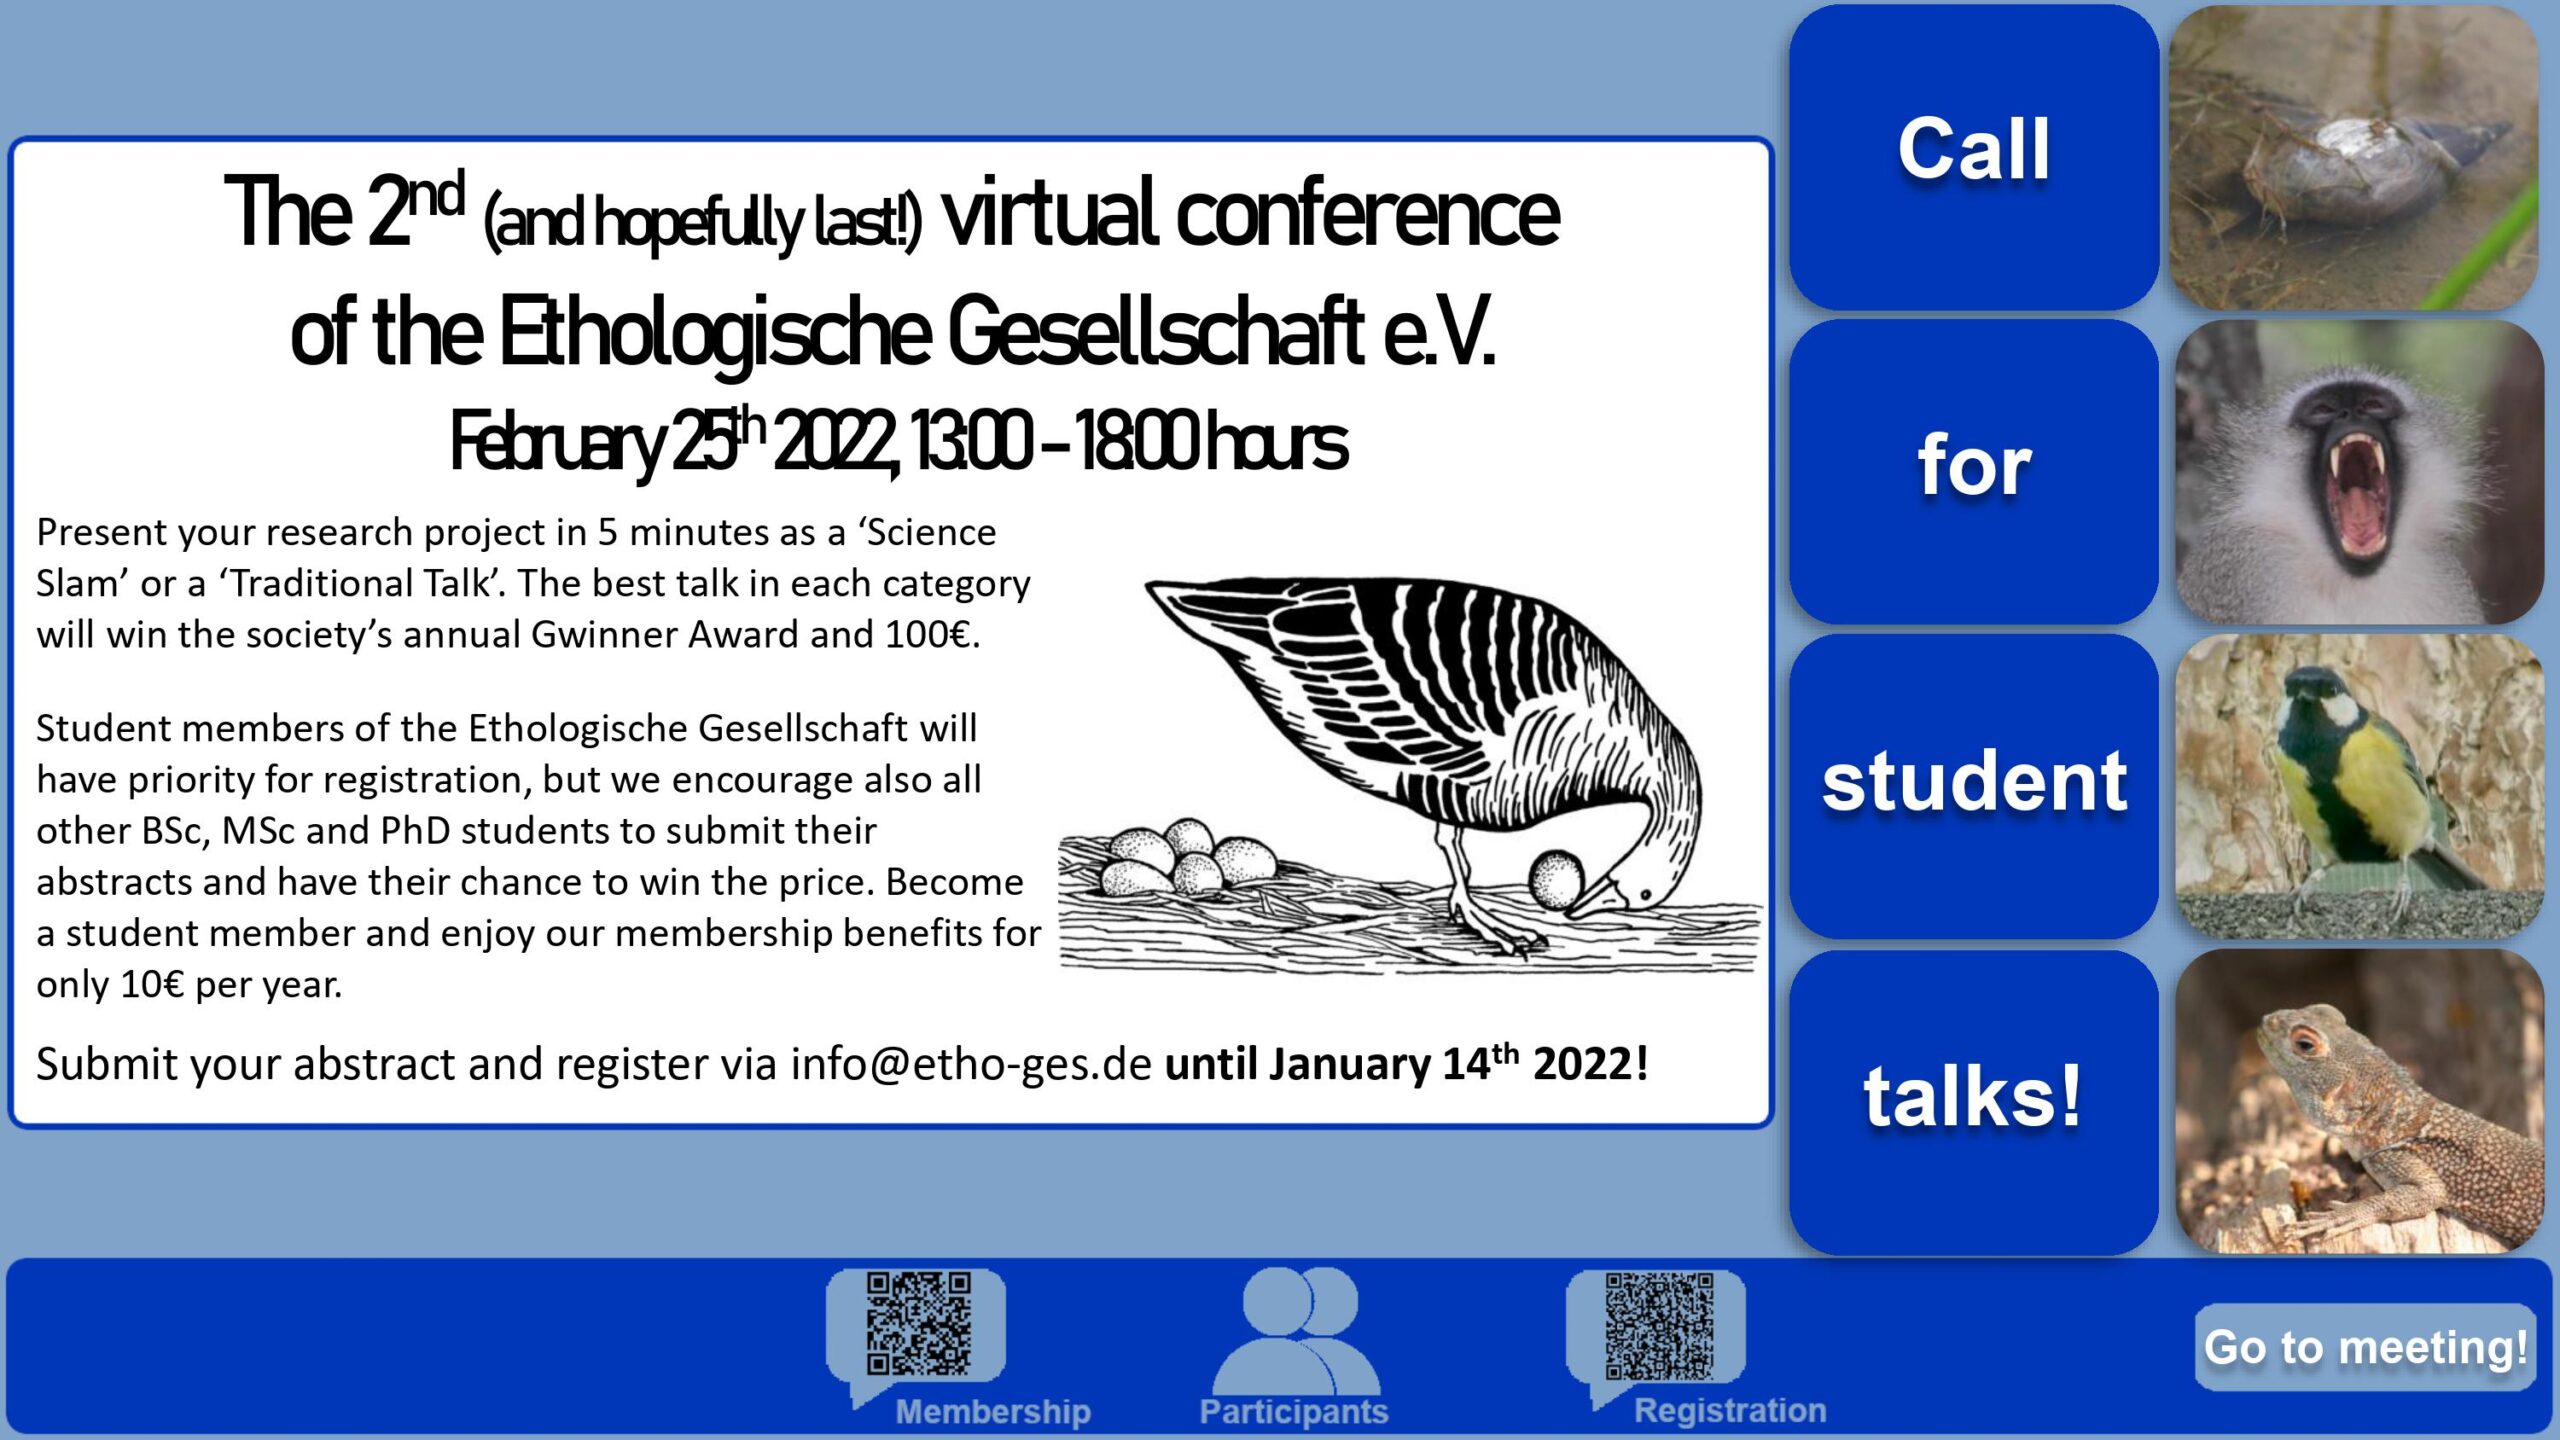 Poster advertising upcoming EthoGes online conference